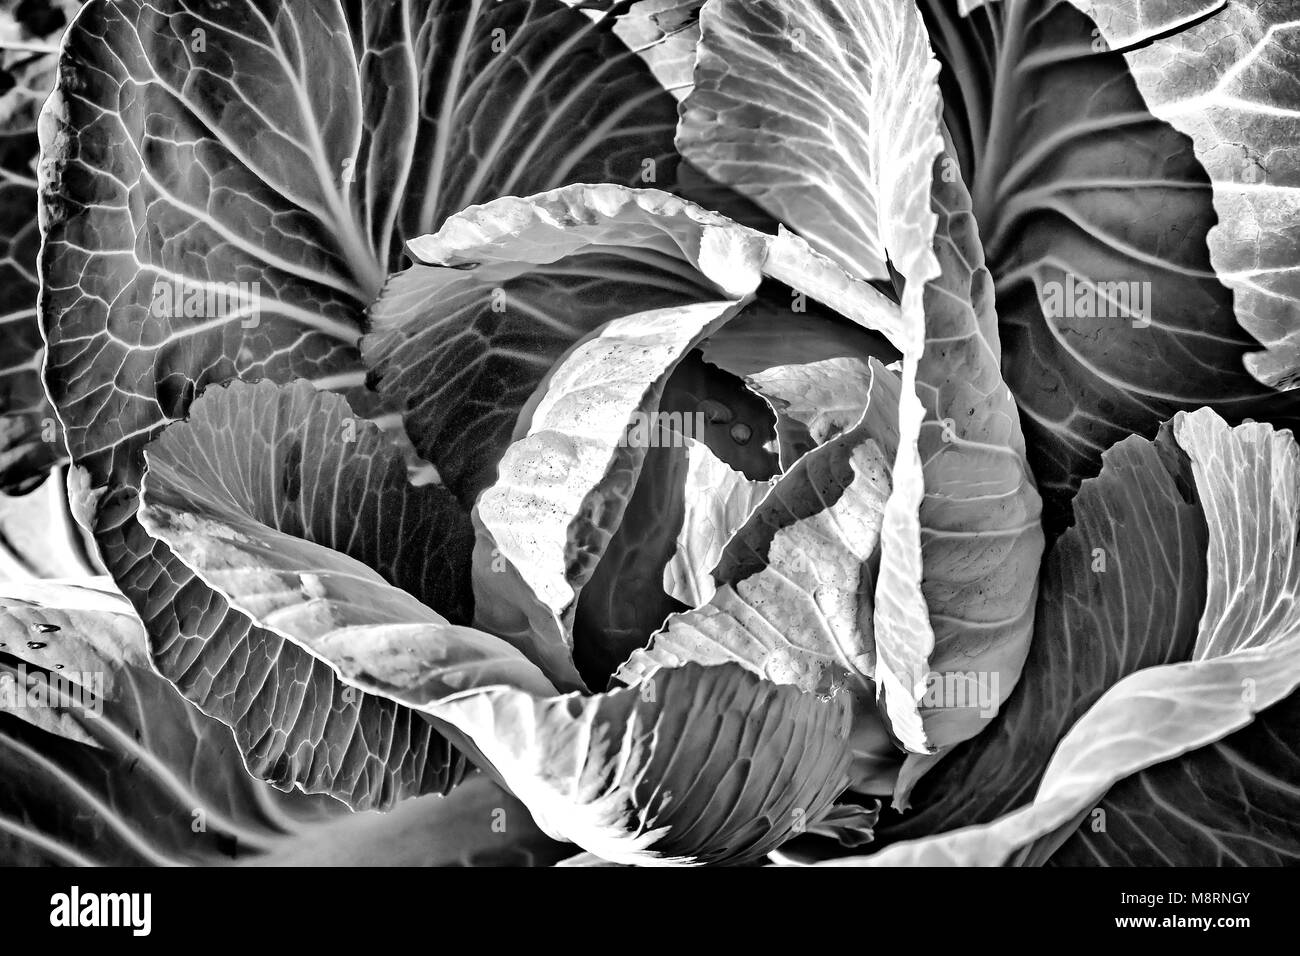 Growing in the garden cabbage. Stock Photo